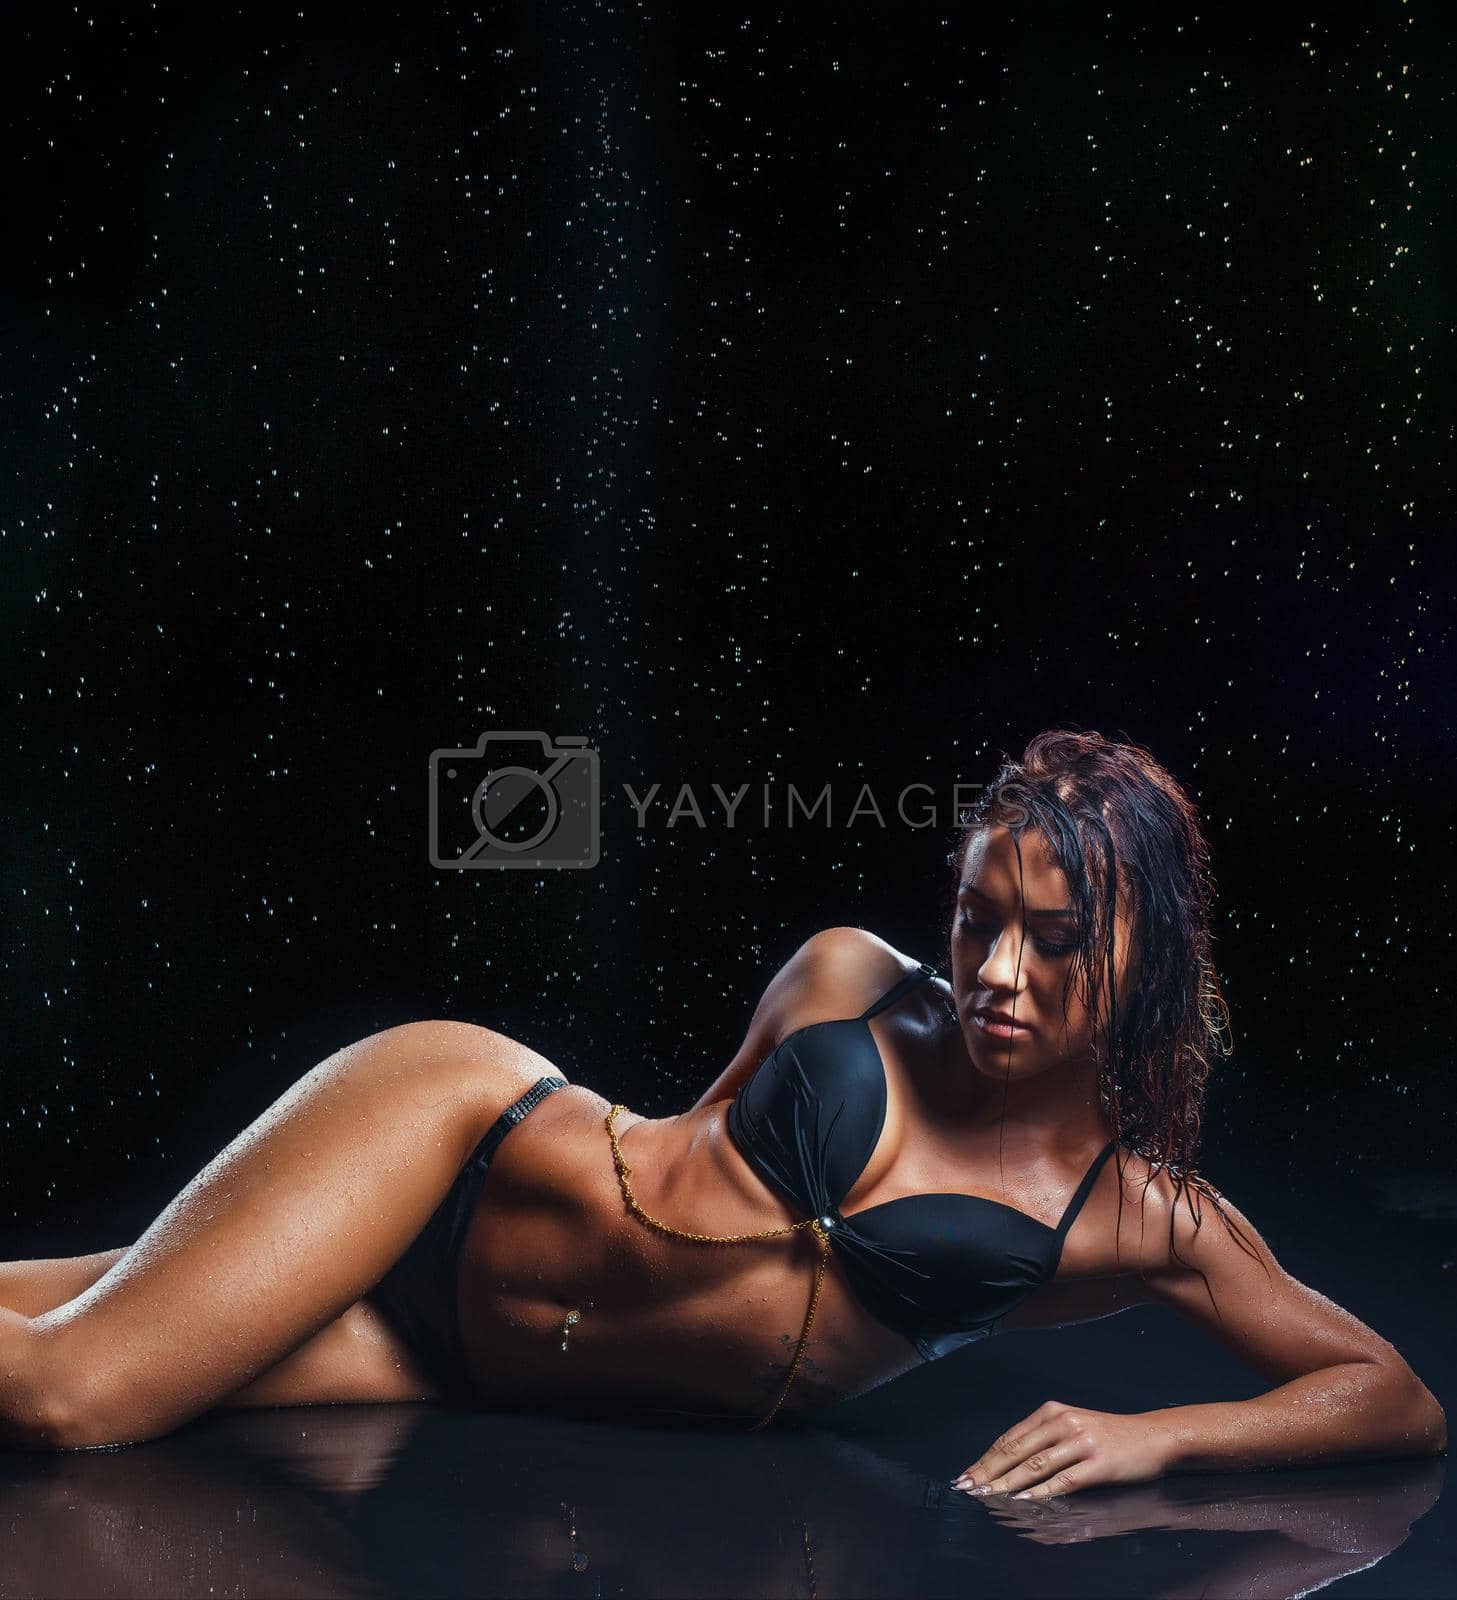 Royalty free image of Sexy brunette fitness woman posing wet over water drops in studio, looking down by fotokvadrat